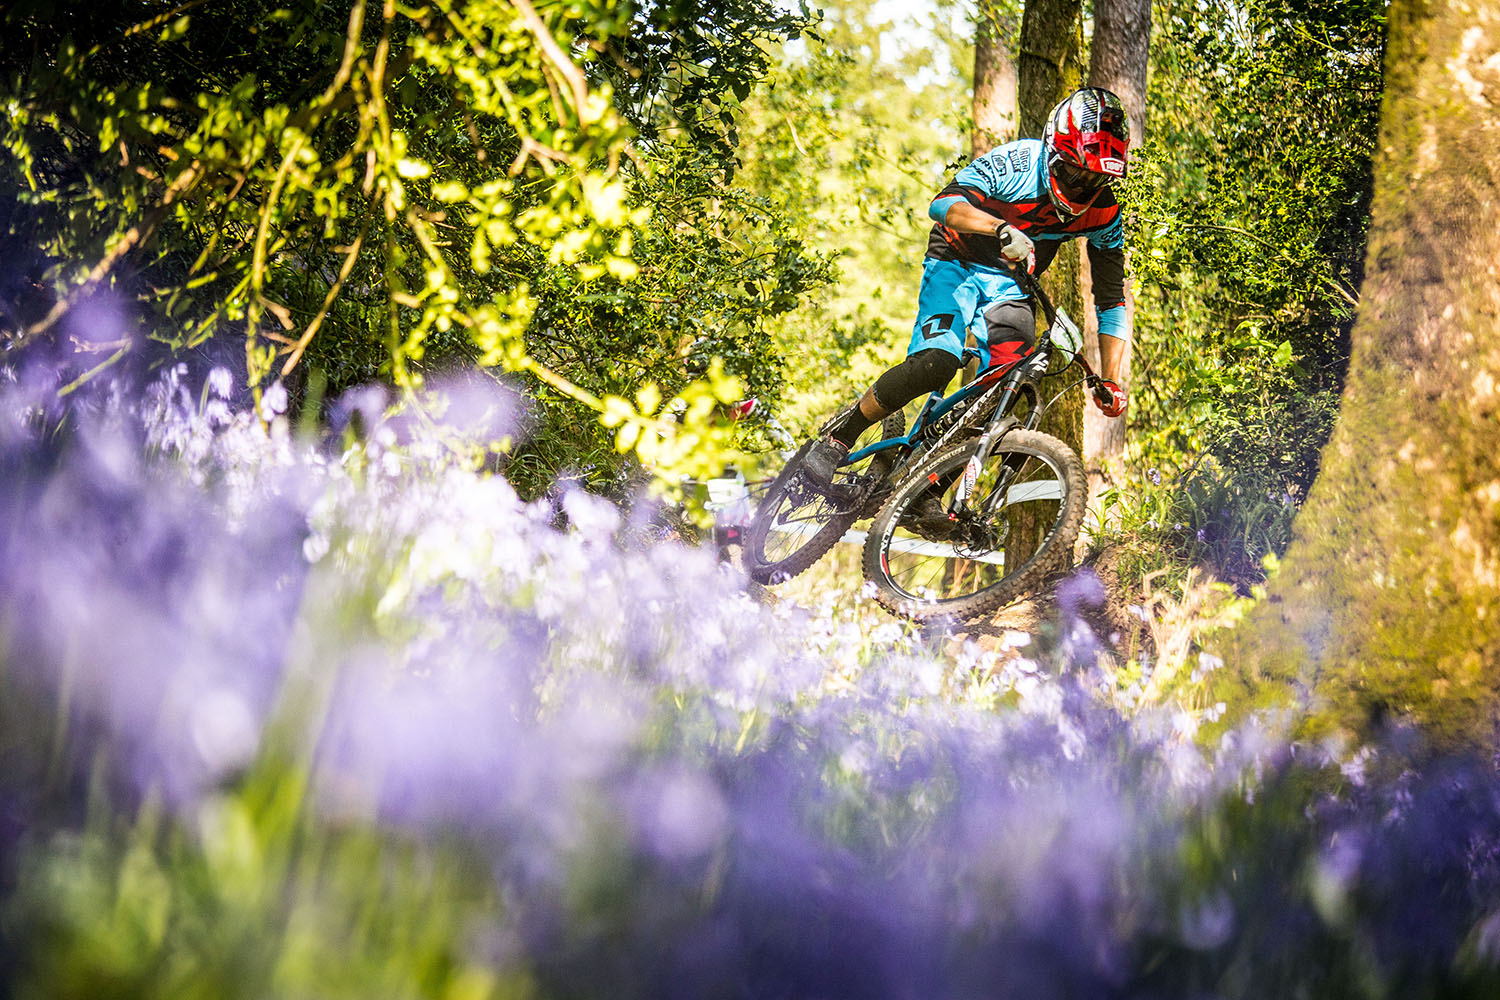 Adrien riding fast and smooth even with a broken hand amidst the pretty flowers.&nbsp; Photo: Lapierre- Jeremy Reuiller